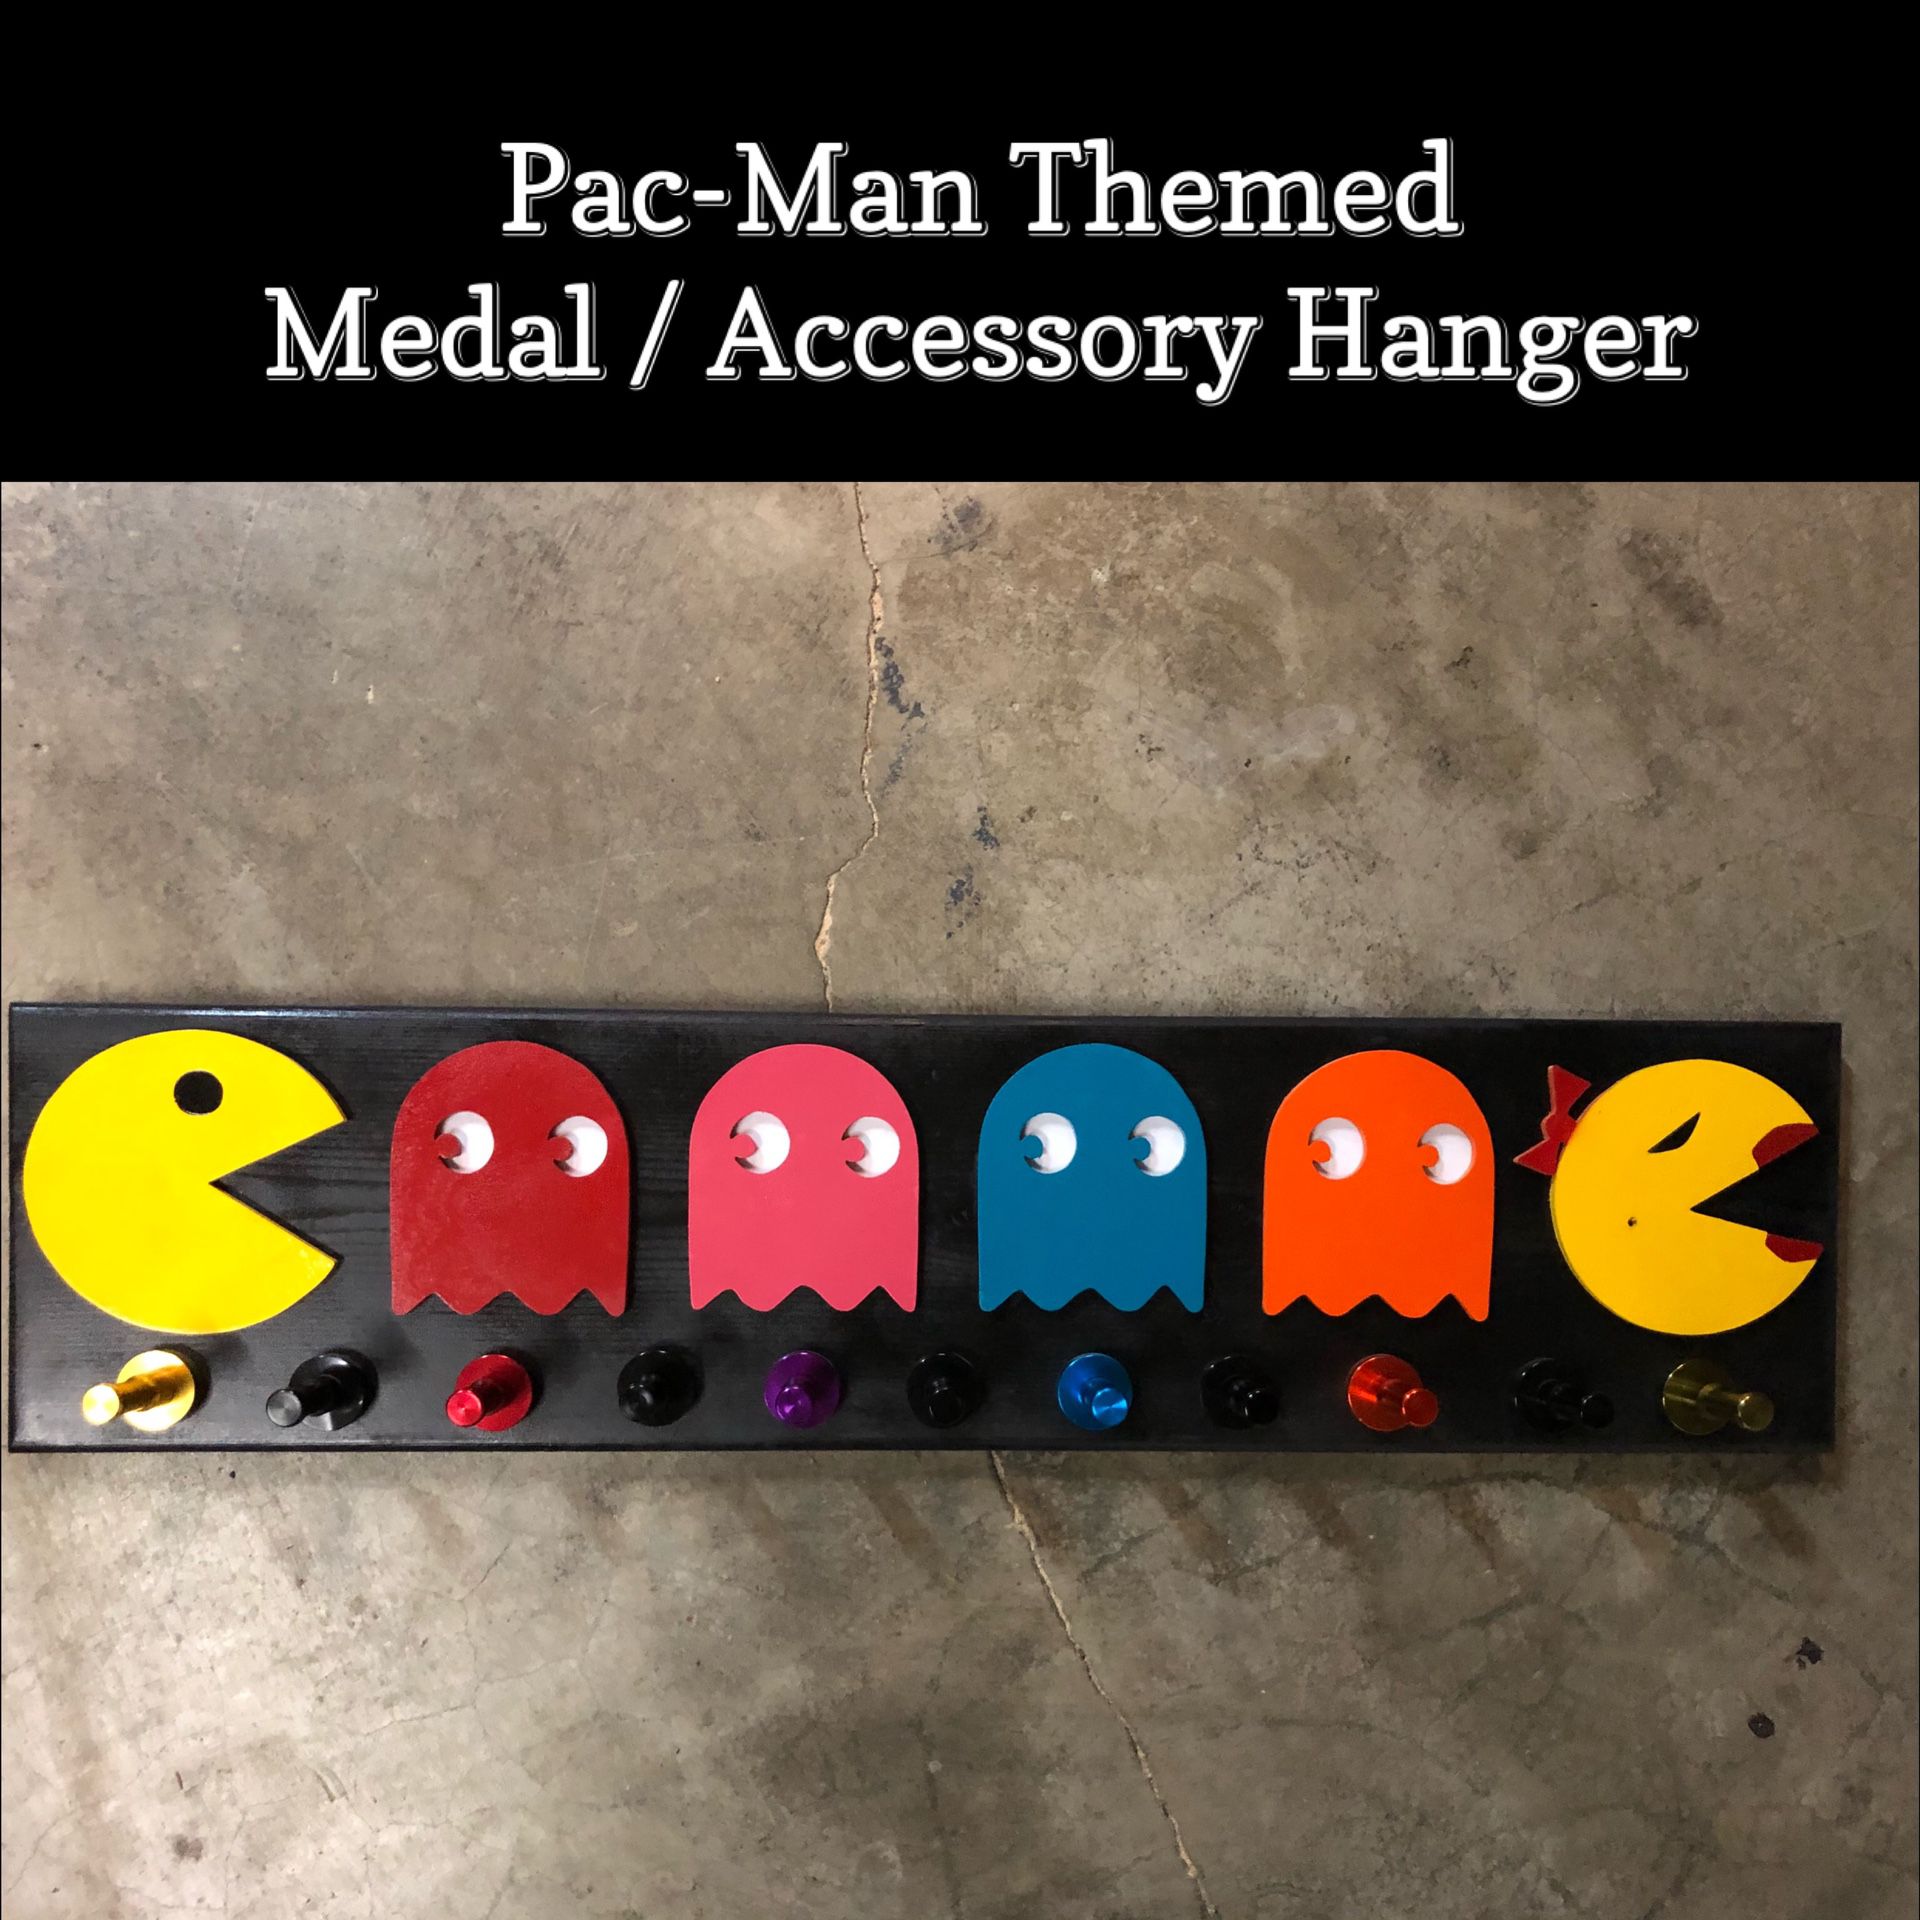 👻 Pac-Man Themed Medal / Accessory Hanger